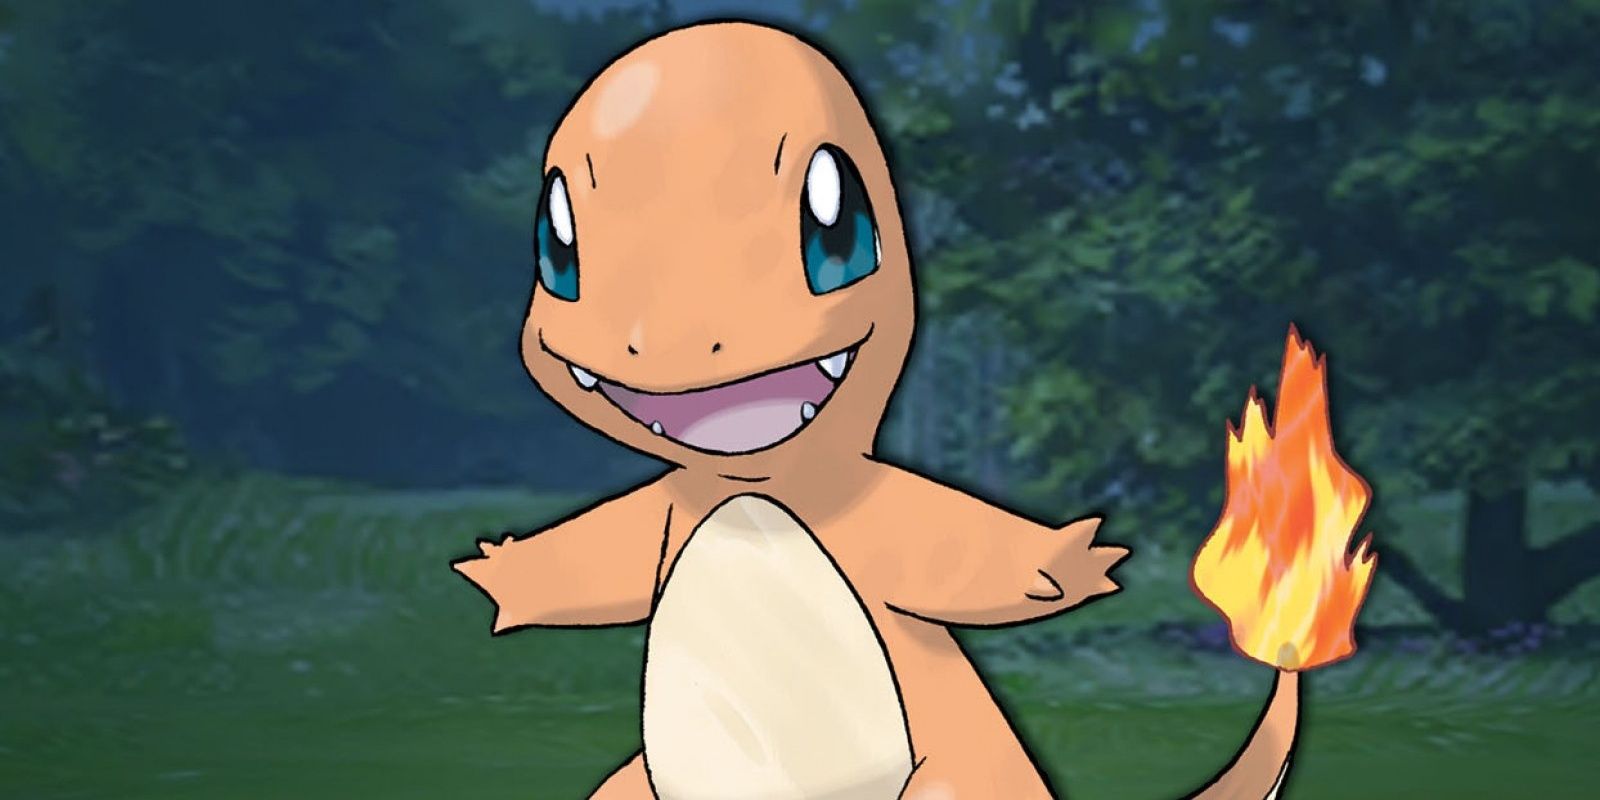 Charmander is smiling with its tail on fire in the Pokémon series